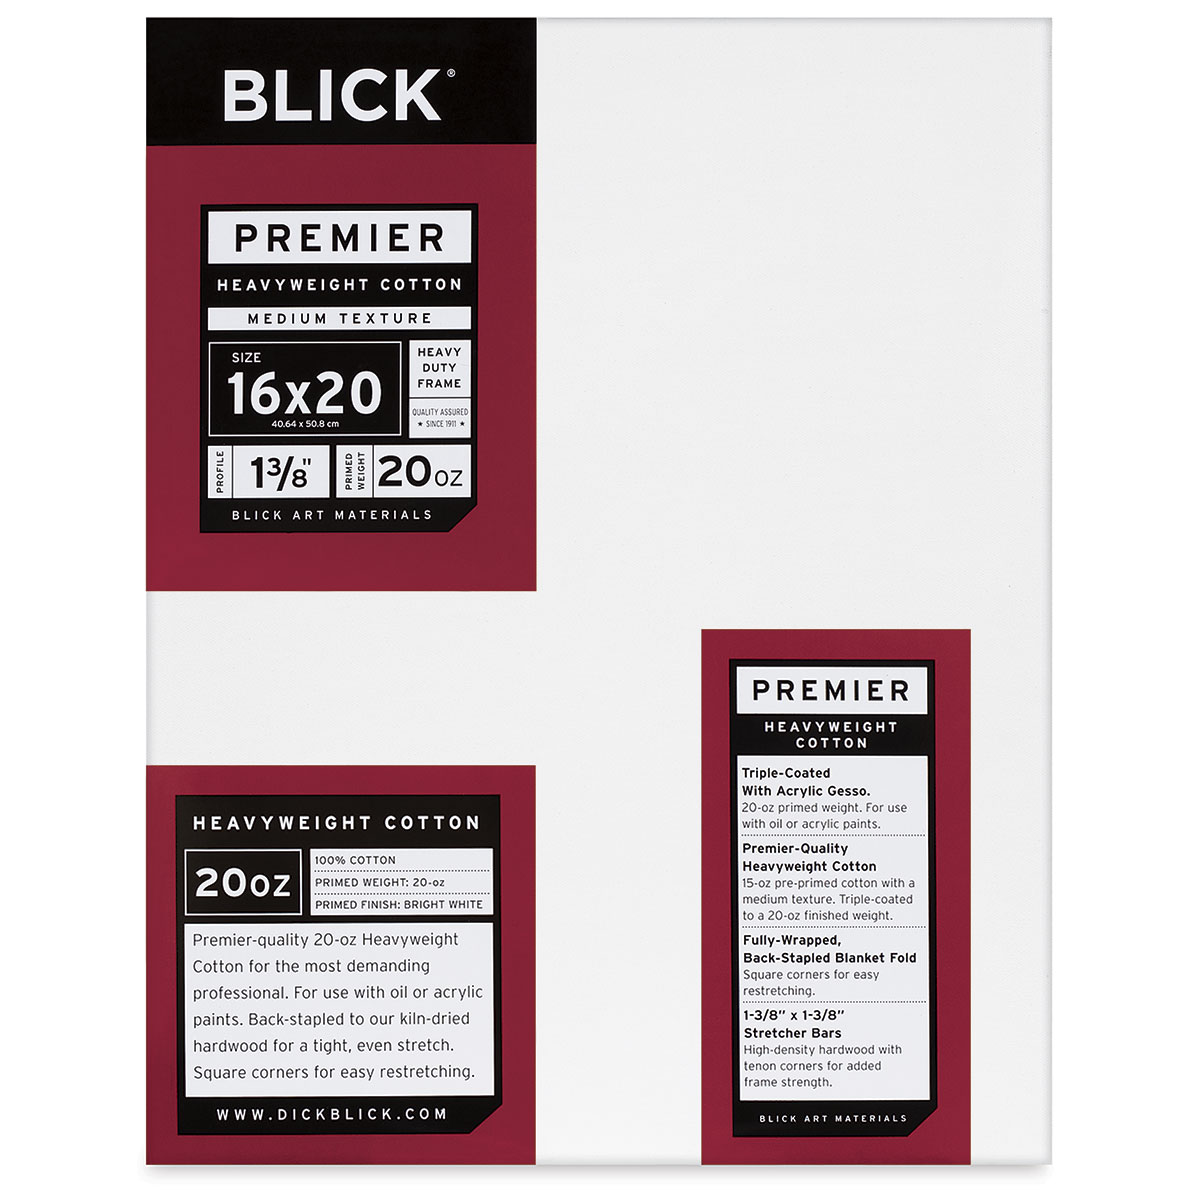 Blick Premier Heavyweight Stretched Cotton Canvas - 16' x 20', 1-3/8' Profile